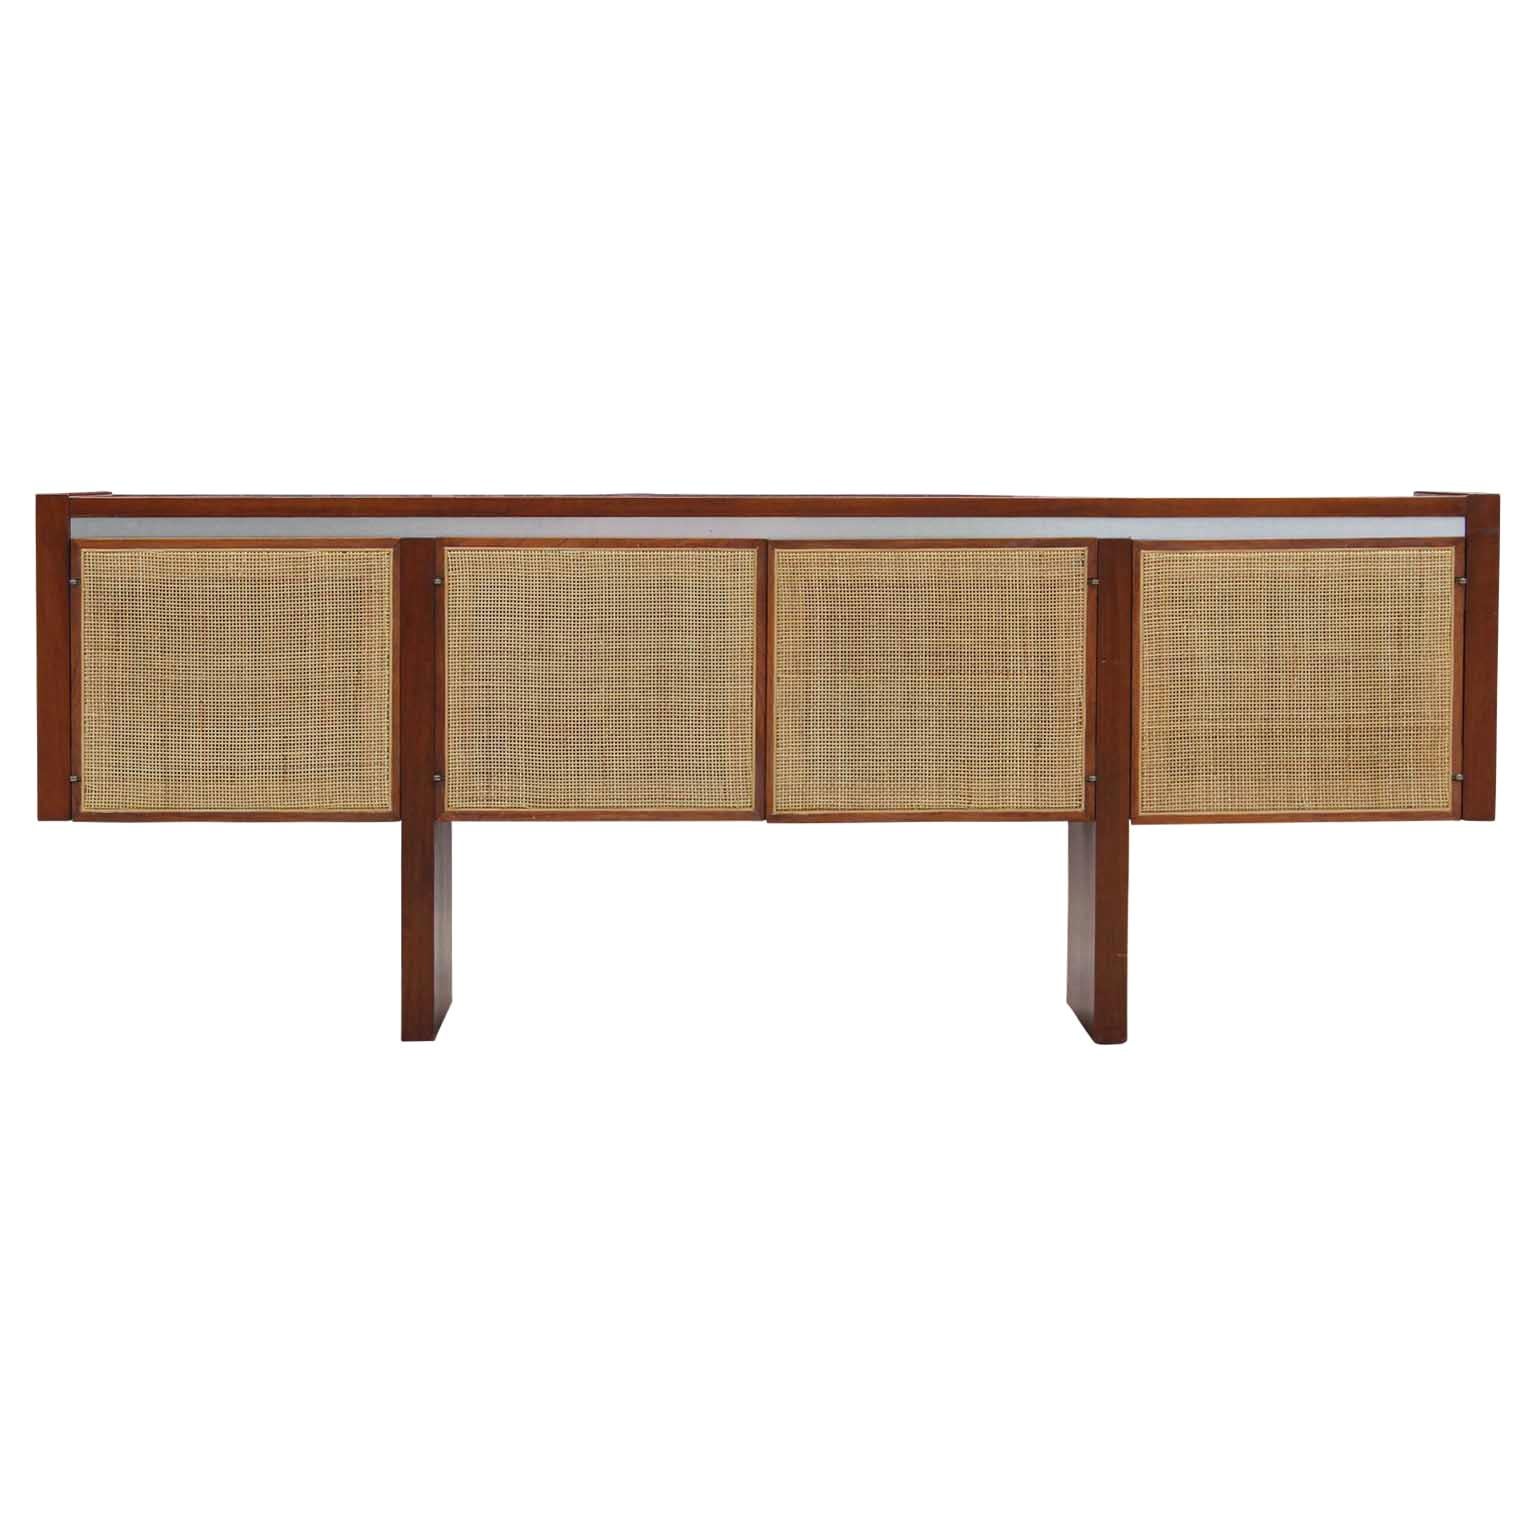 Midcentury Sideboard or Credenza with Four Caned Doors